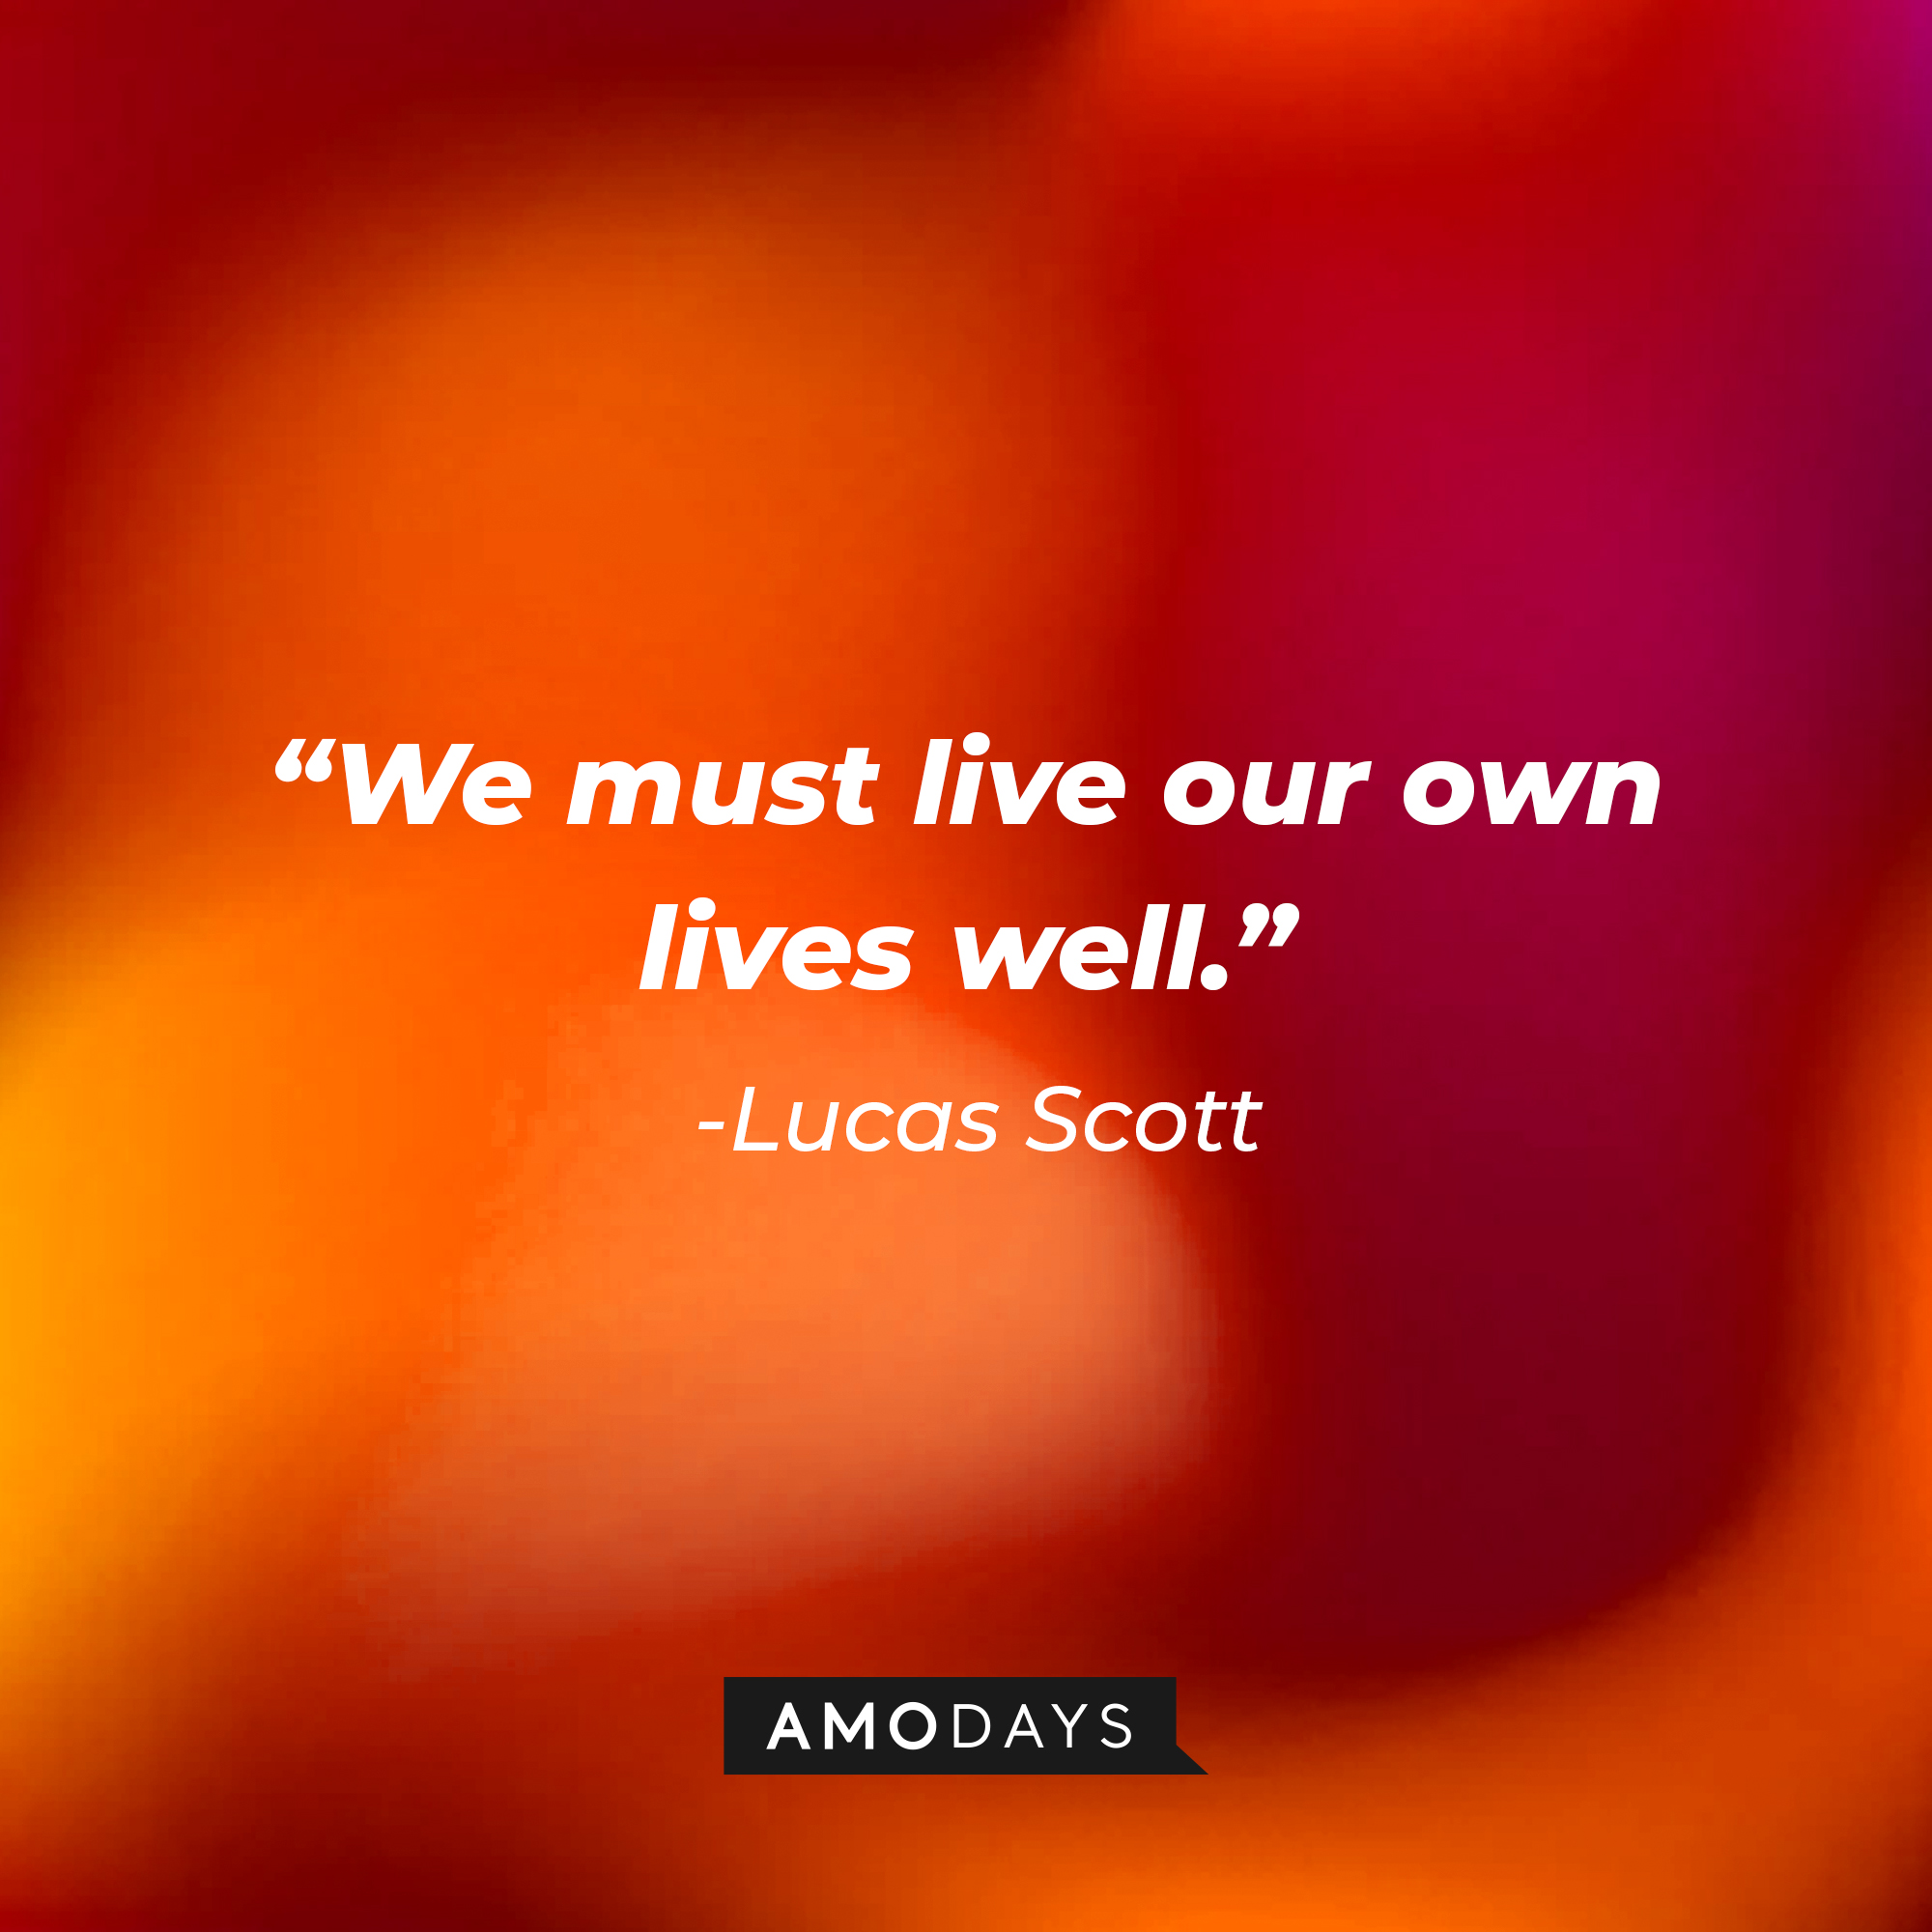 Lucas Scott’s quote: “We must live our own lives well.” | Source:facebook.com/OneTreeHill